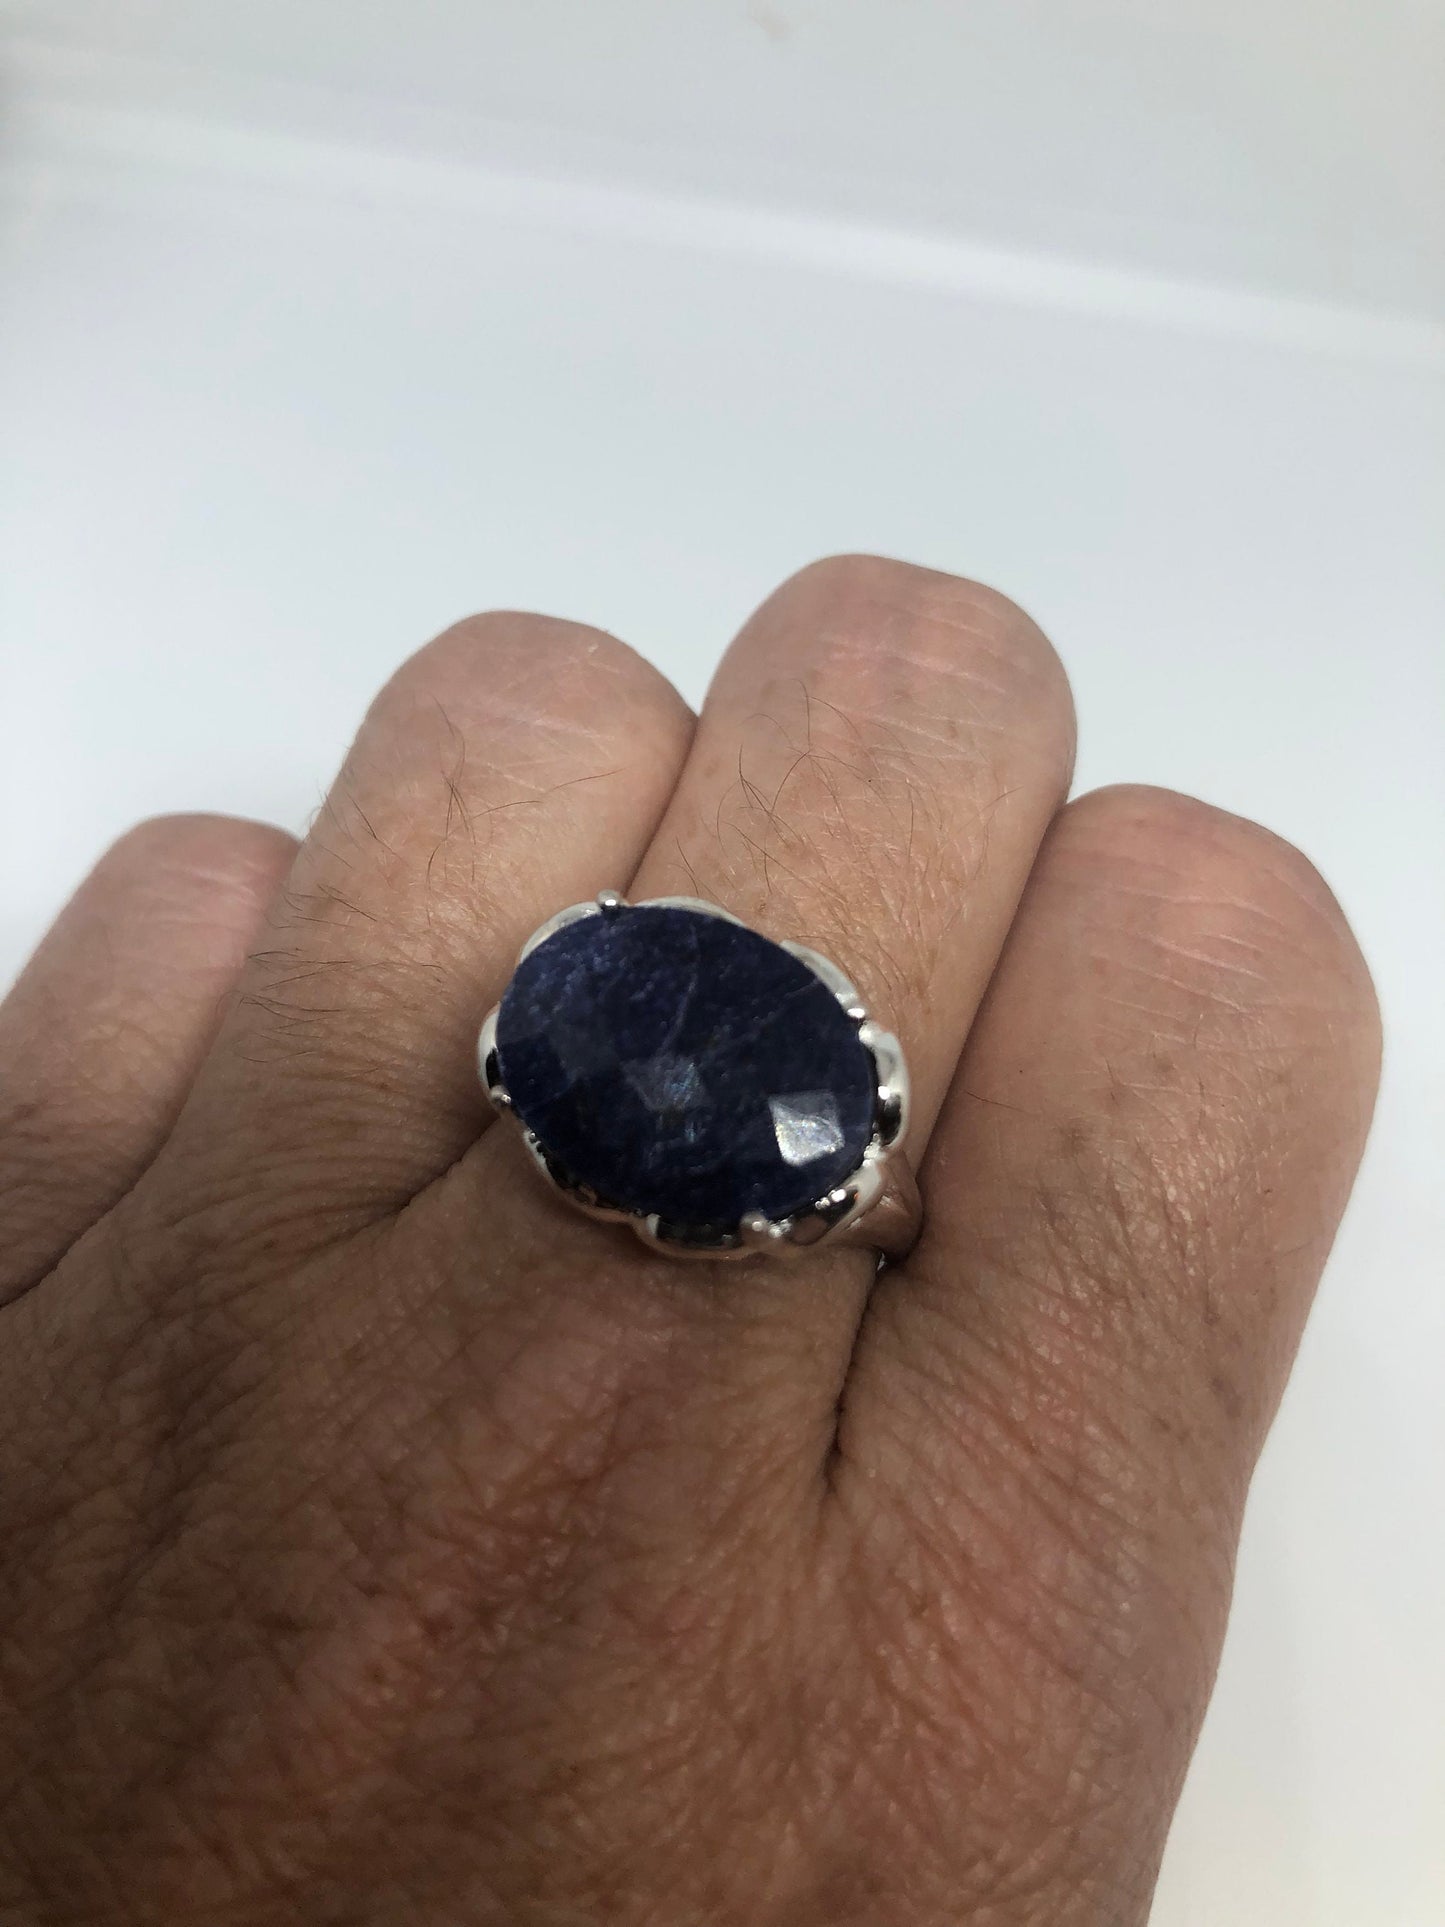 Vintage Handmade deep blue sapphire setting 925 Sterling Silver gothic Ring